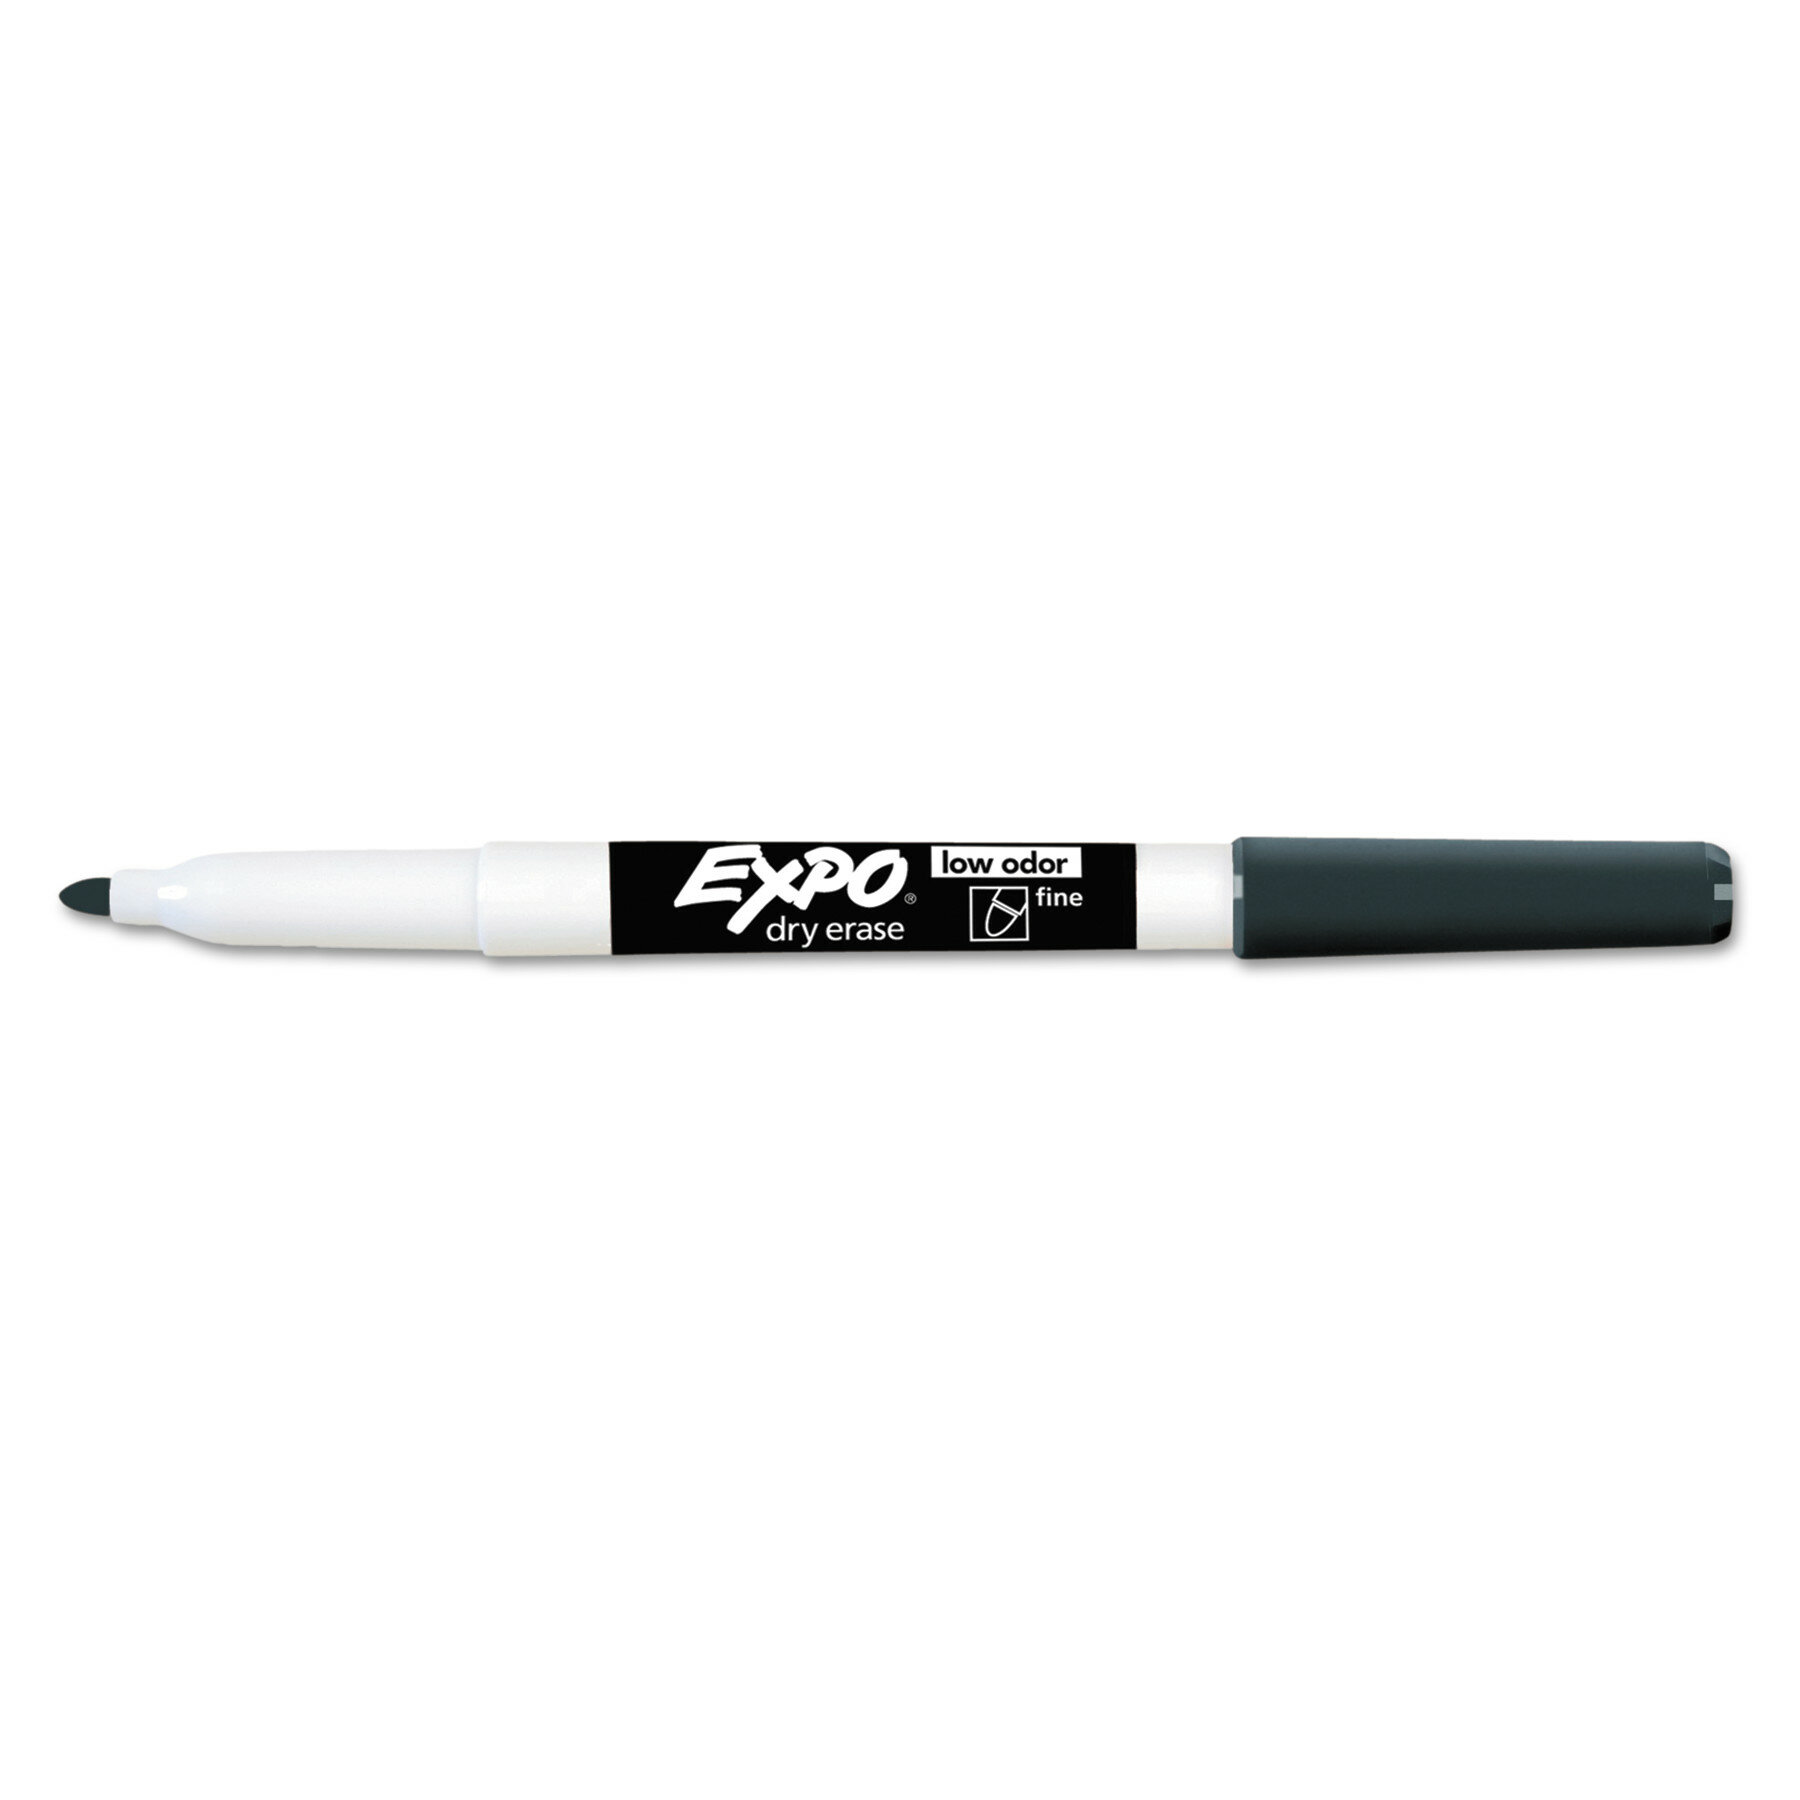  EXPO Low Odor Dry Erase Marker Starter Set, Fine Tip, Assorted  Colors, 7-Piece Kit : Dry Erase Markers : Office Products